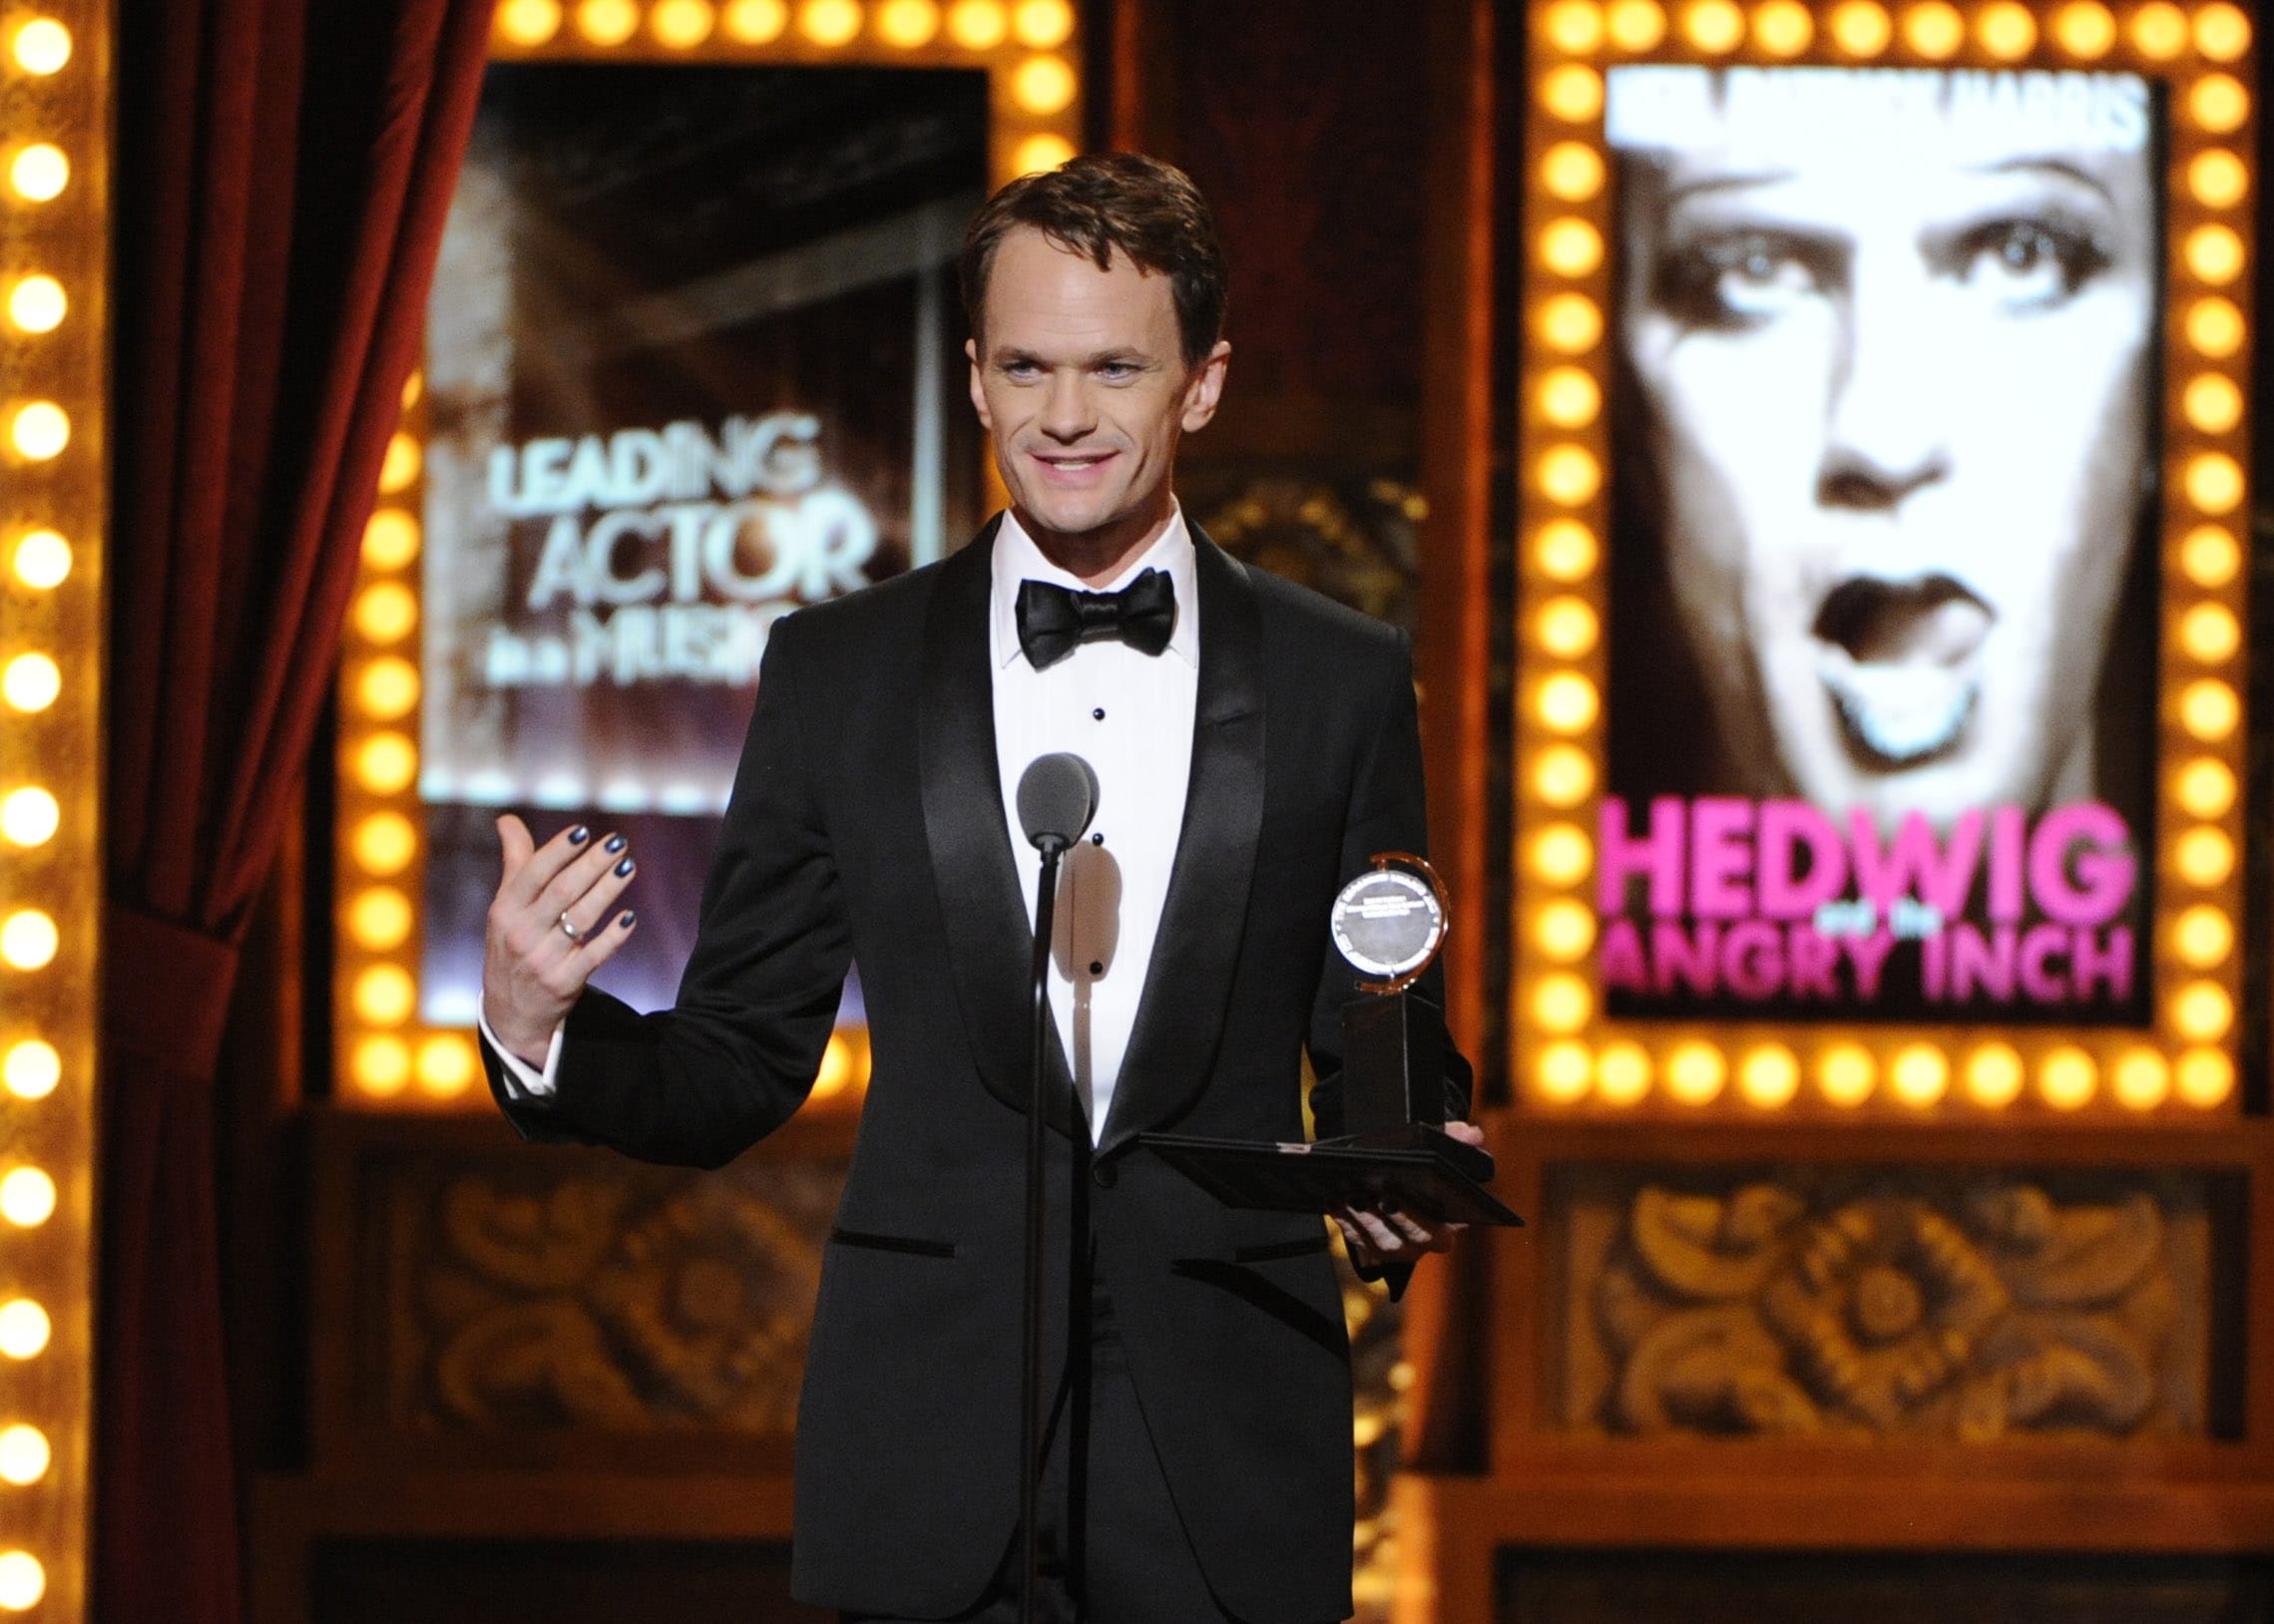 Neil Patrick Harris won his first Tony, for best actor in a musical, for &quot;Hedwig and the Angry Inch.&quot;